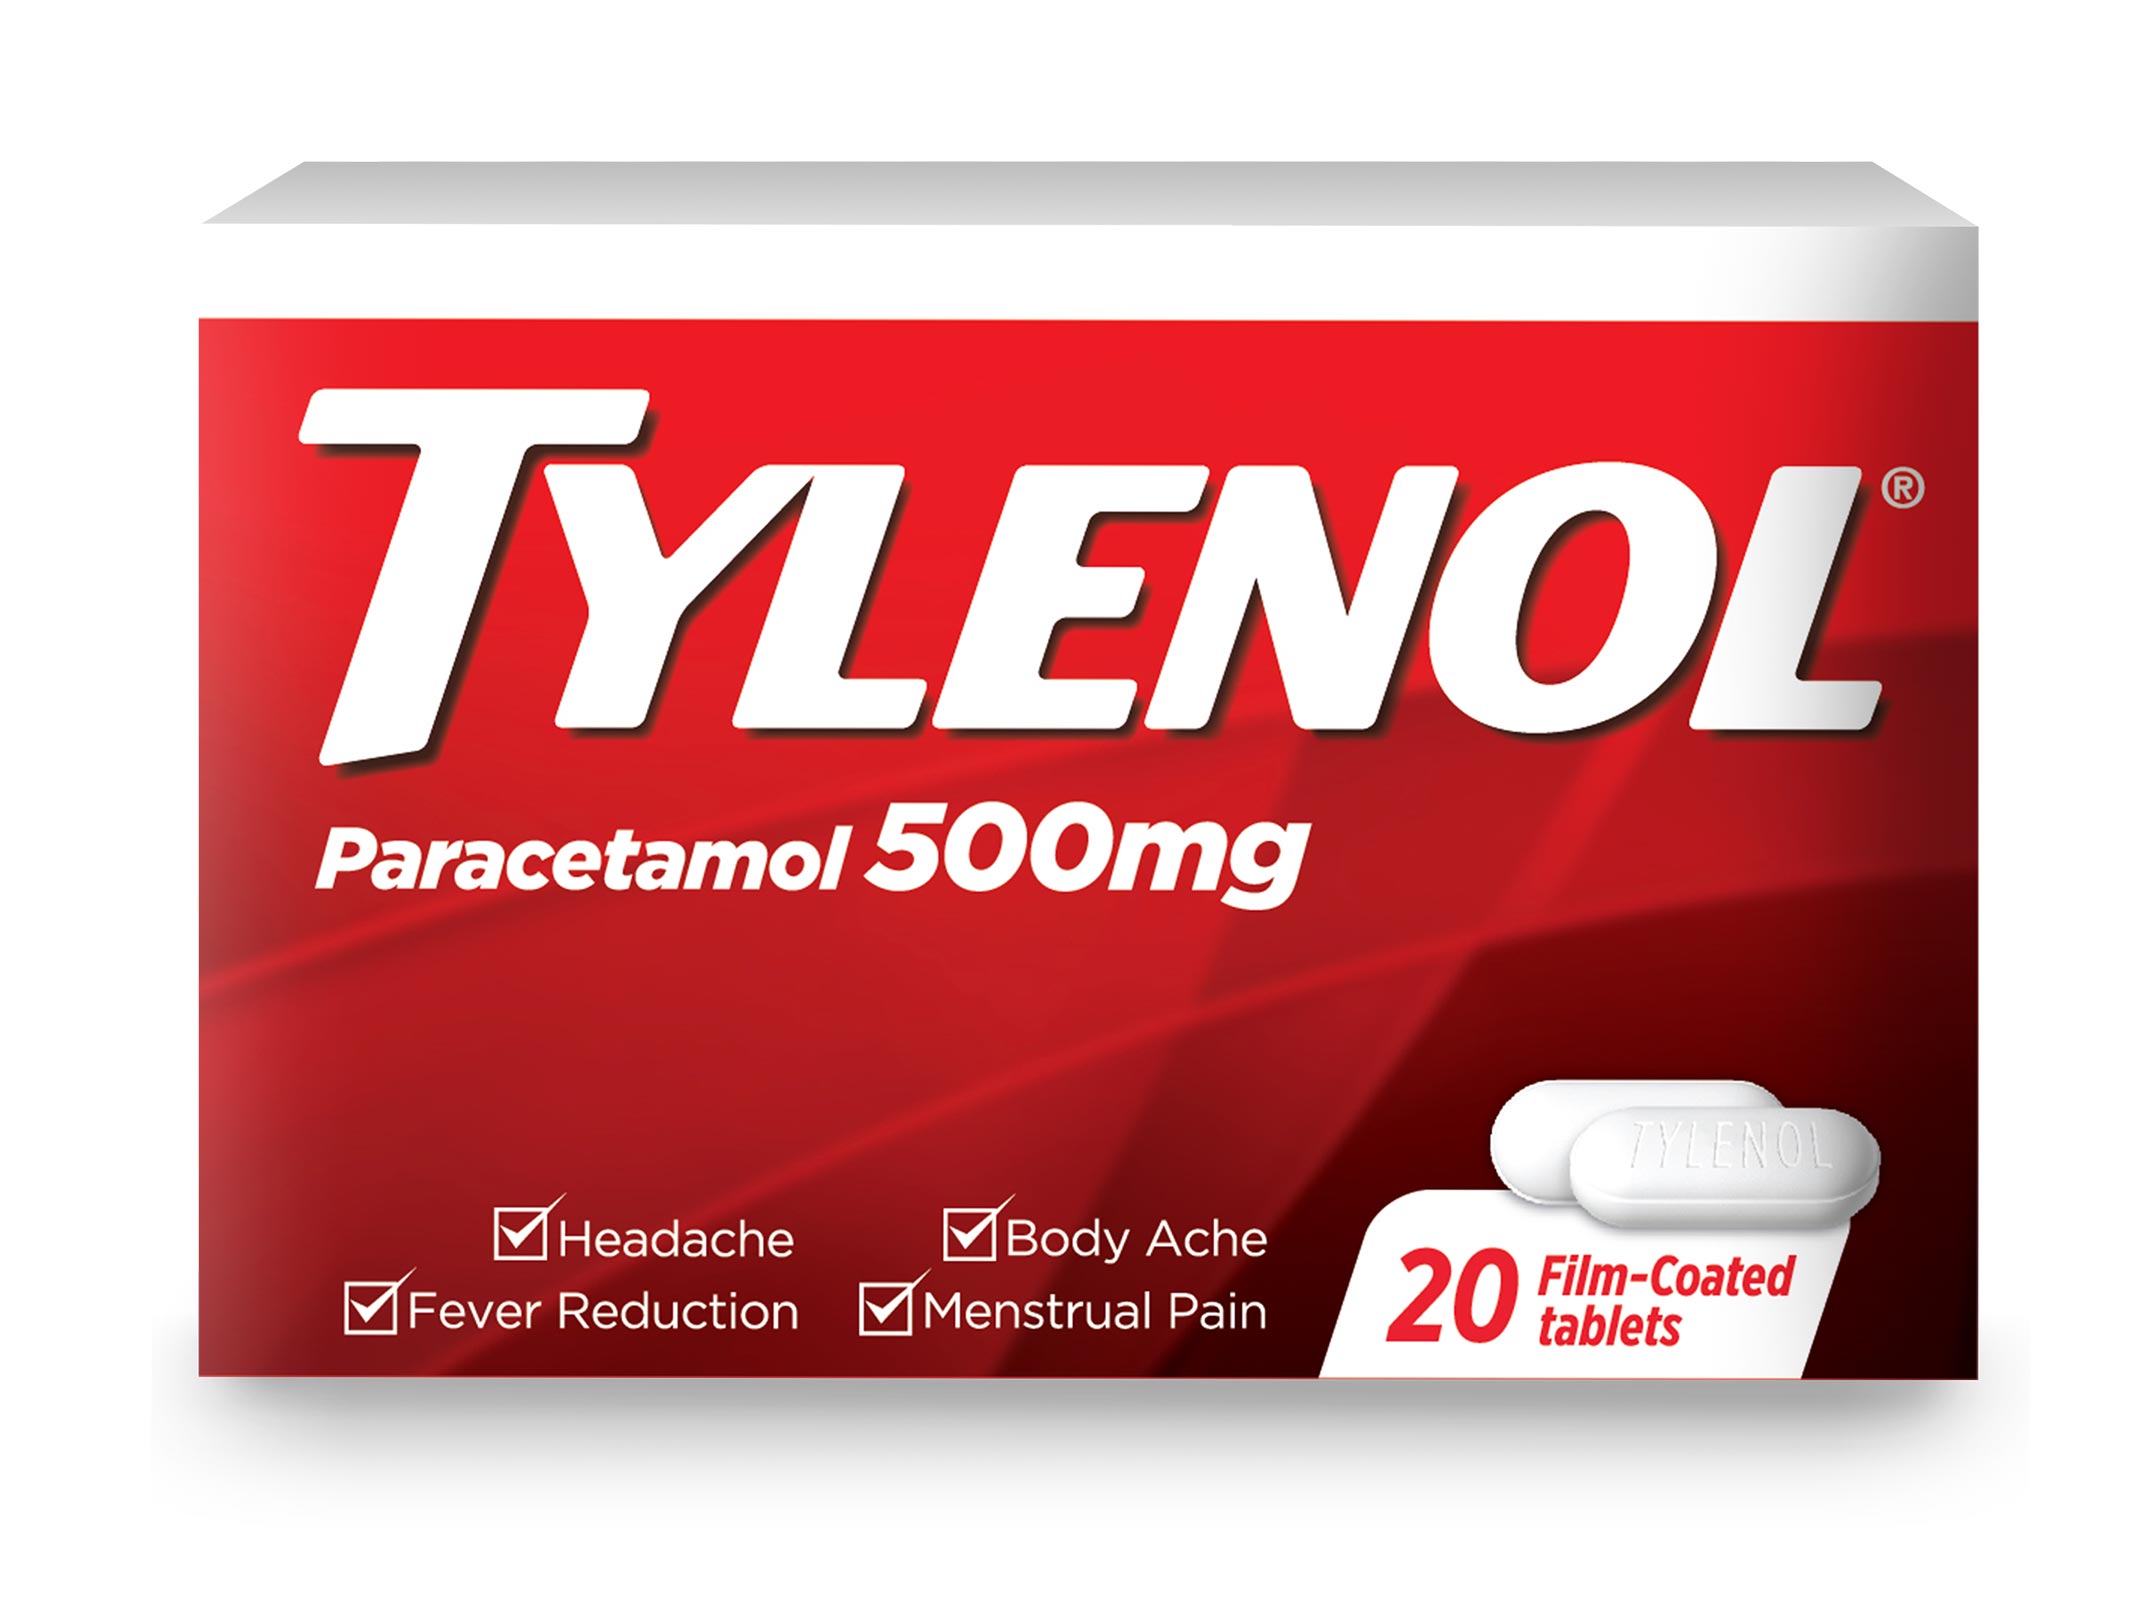 Tylenol-500mg-with-20-film-coated-tablets-to-relieve-headaches-body-aches- fever-reduction-menstrual-pain